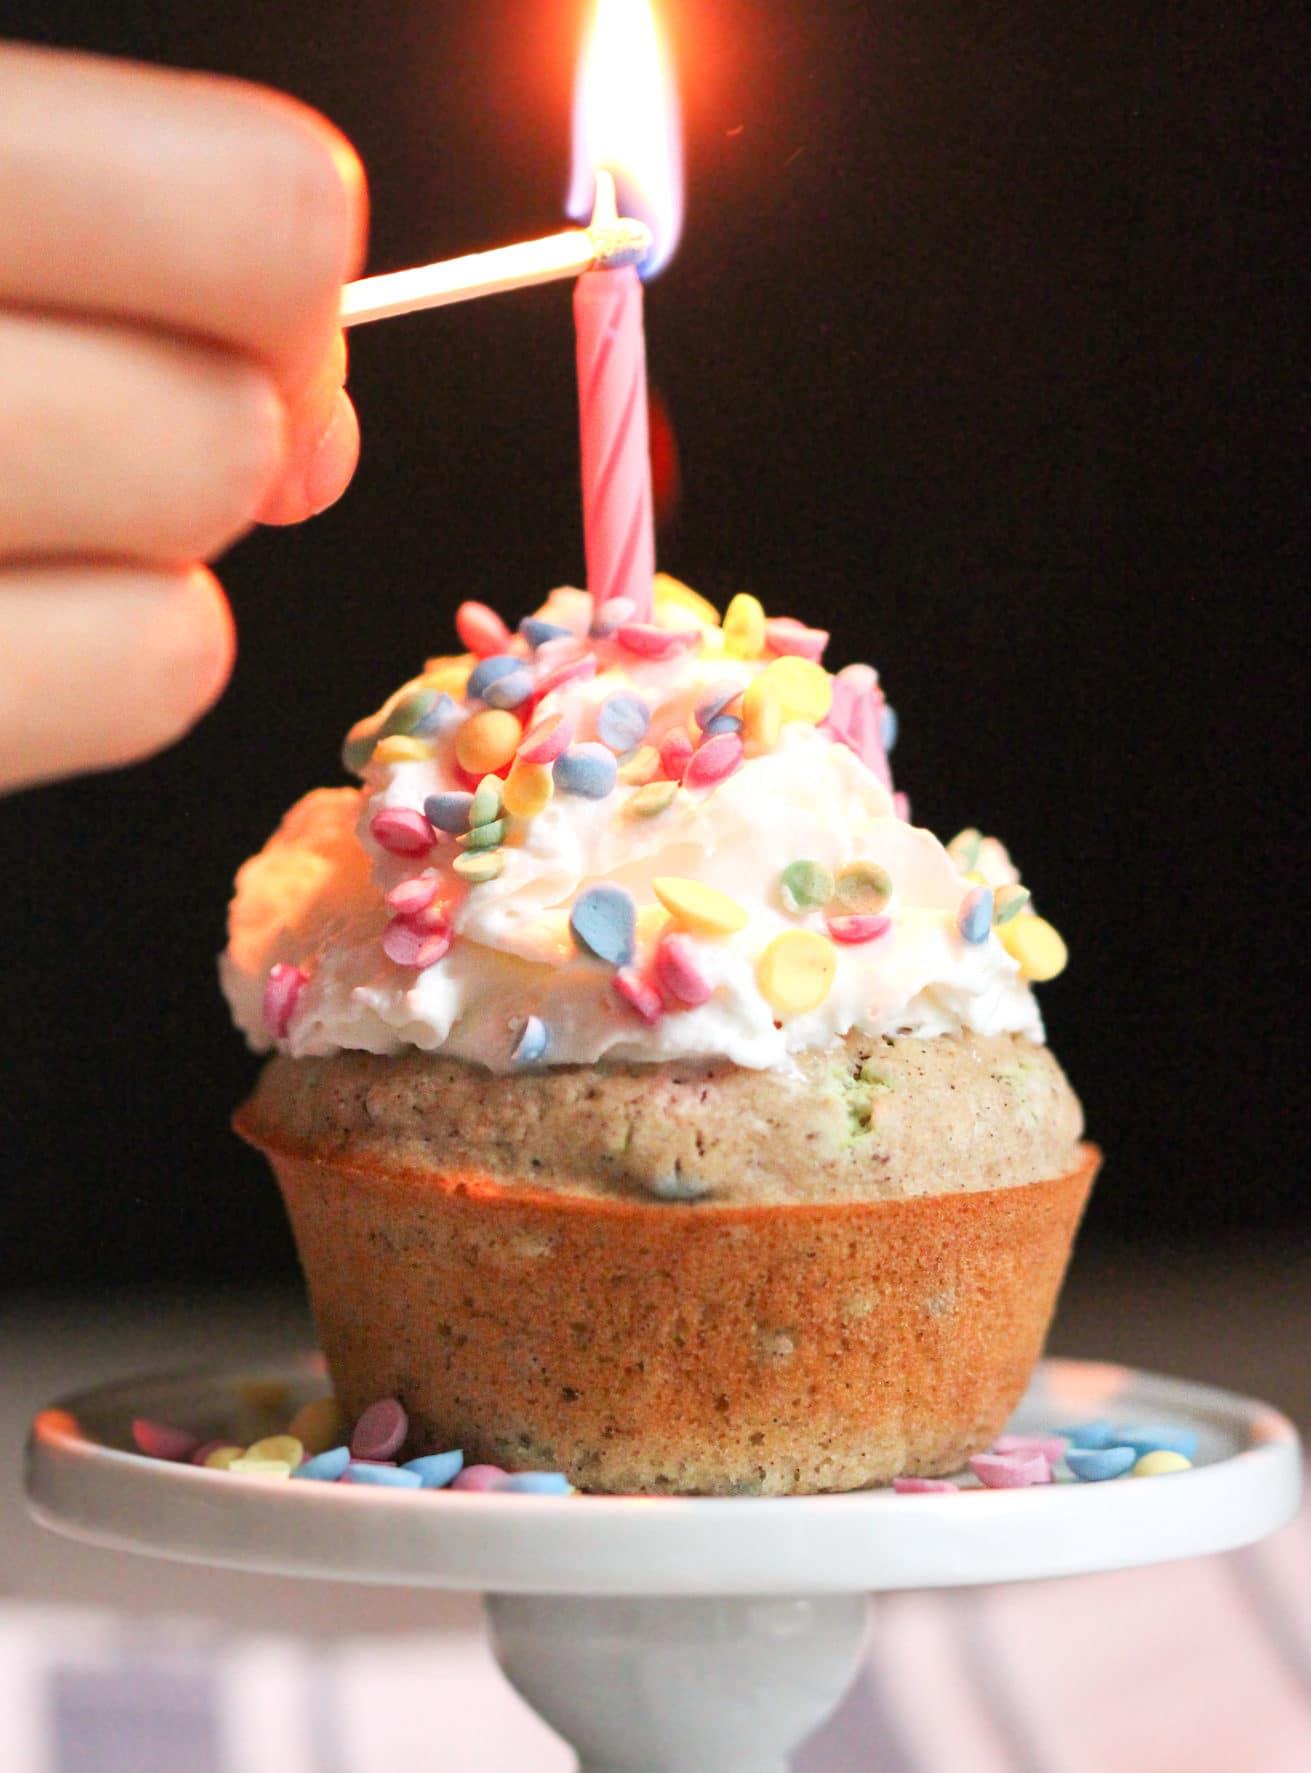 Healthy Funfetti Cupcakes! Craving Funfetti Cake but don't want all the calories, sugar, and artificial ingredients? Make these Healthy Funfetti Cupcakes! They’re all natural, sugar free, low fat, low calorie, and gluten free too. NO white sugar, white flour, artificial food dyes, or trans fats whatsoever. These light and fluffy cupcakes will blow your mind! Healthy Dessert Recipes with sugar free, low calorie, low fat, high protein, gluten free, dairy free, and vegan options at the Desserts With Benefits Blog (www.DessertsWithBenefits.com)